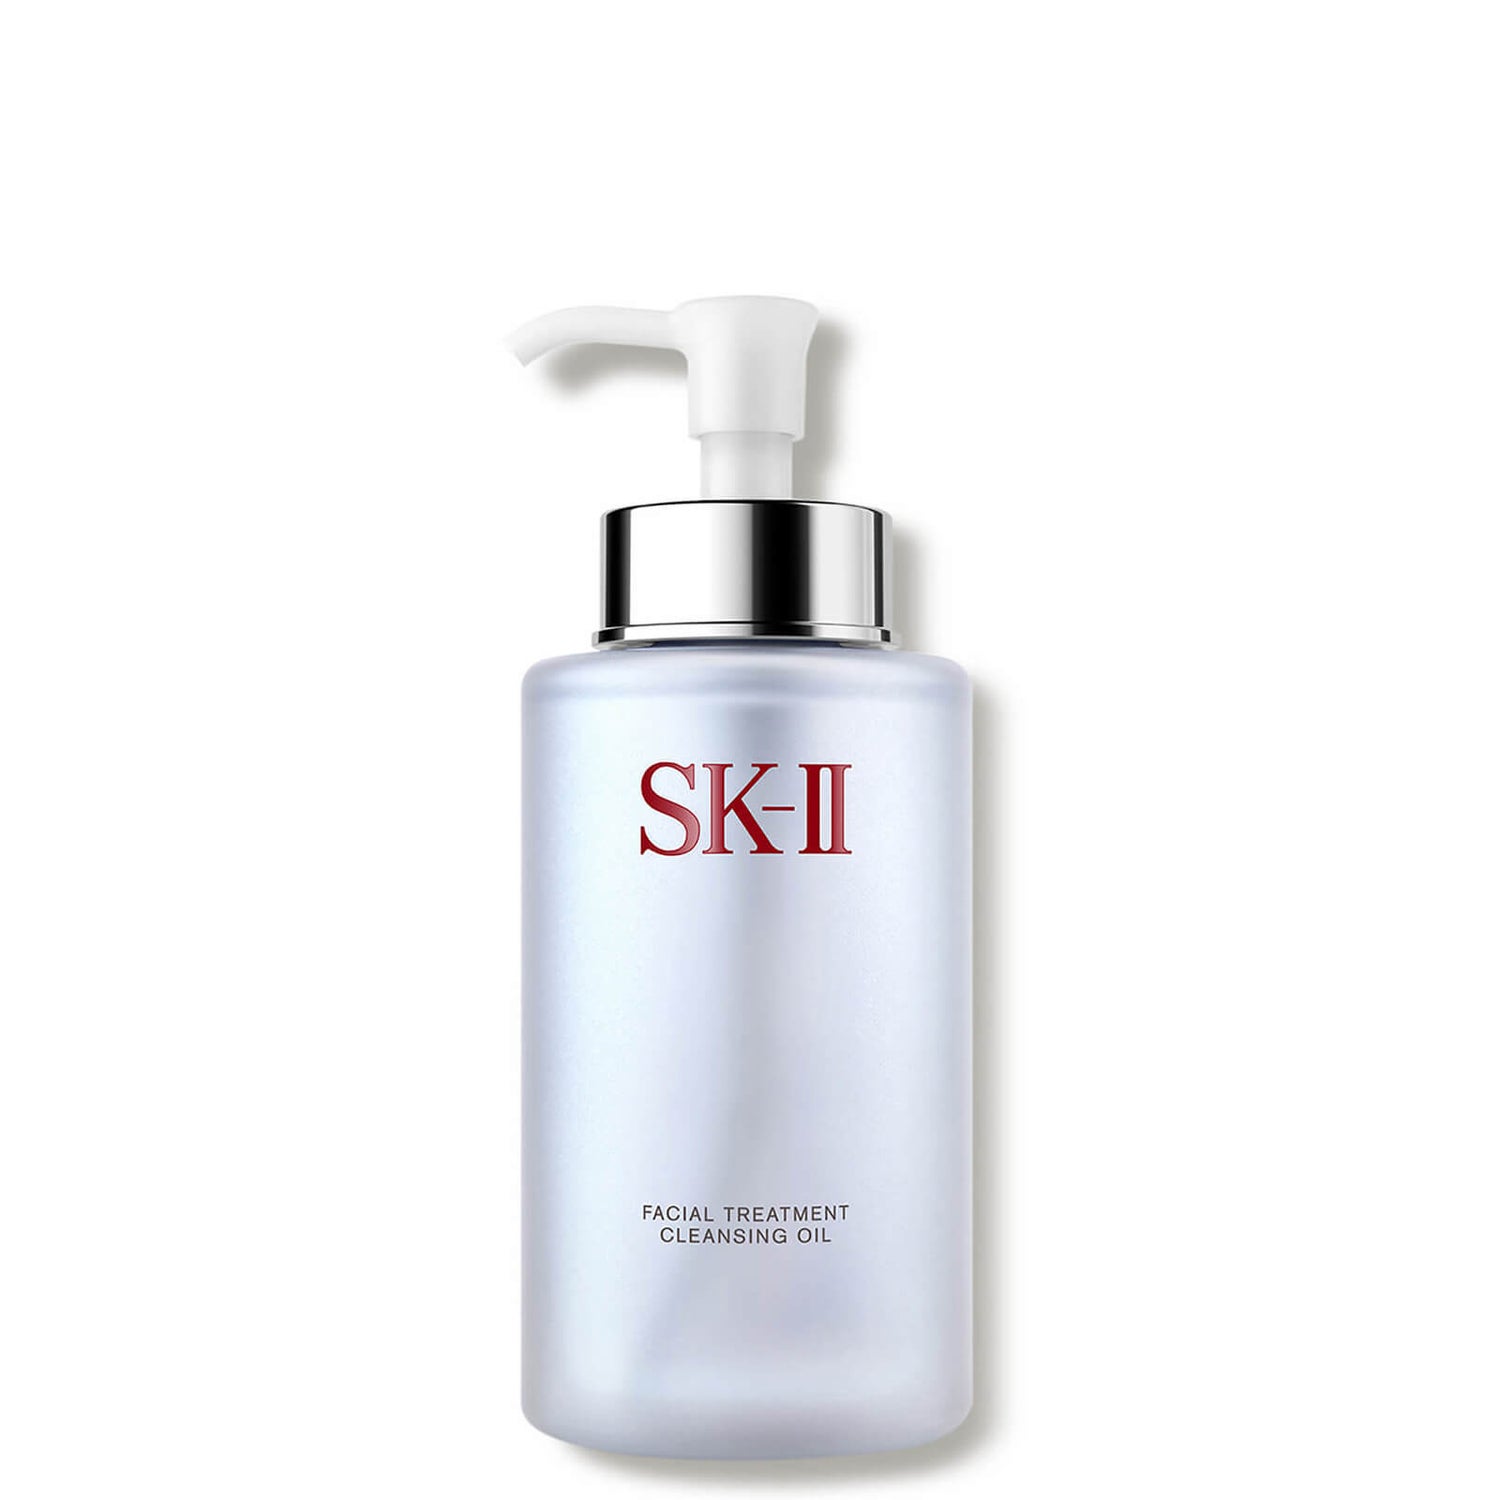 SK-II Facial Treatment Cleansing Oil (250 ml.)